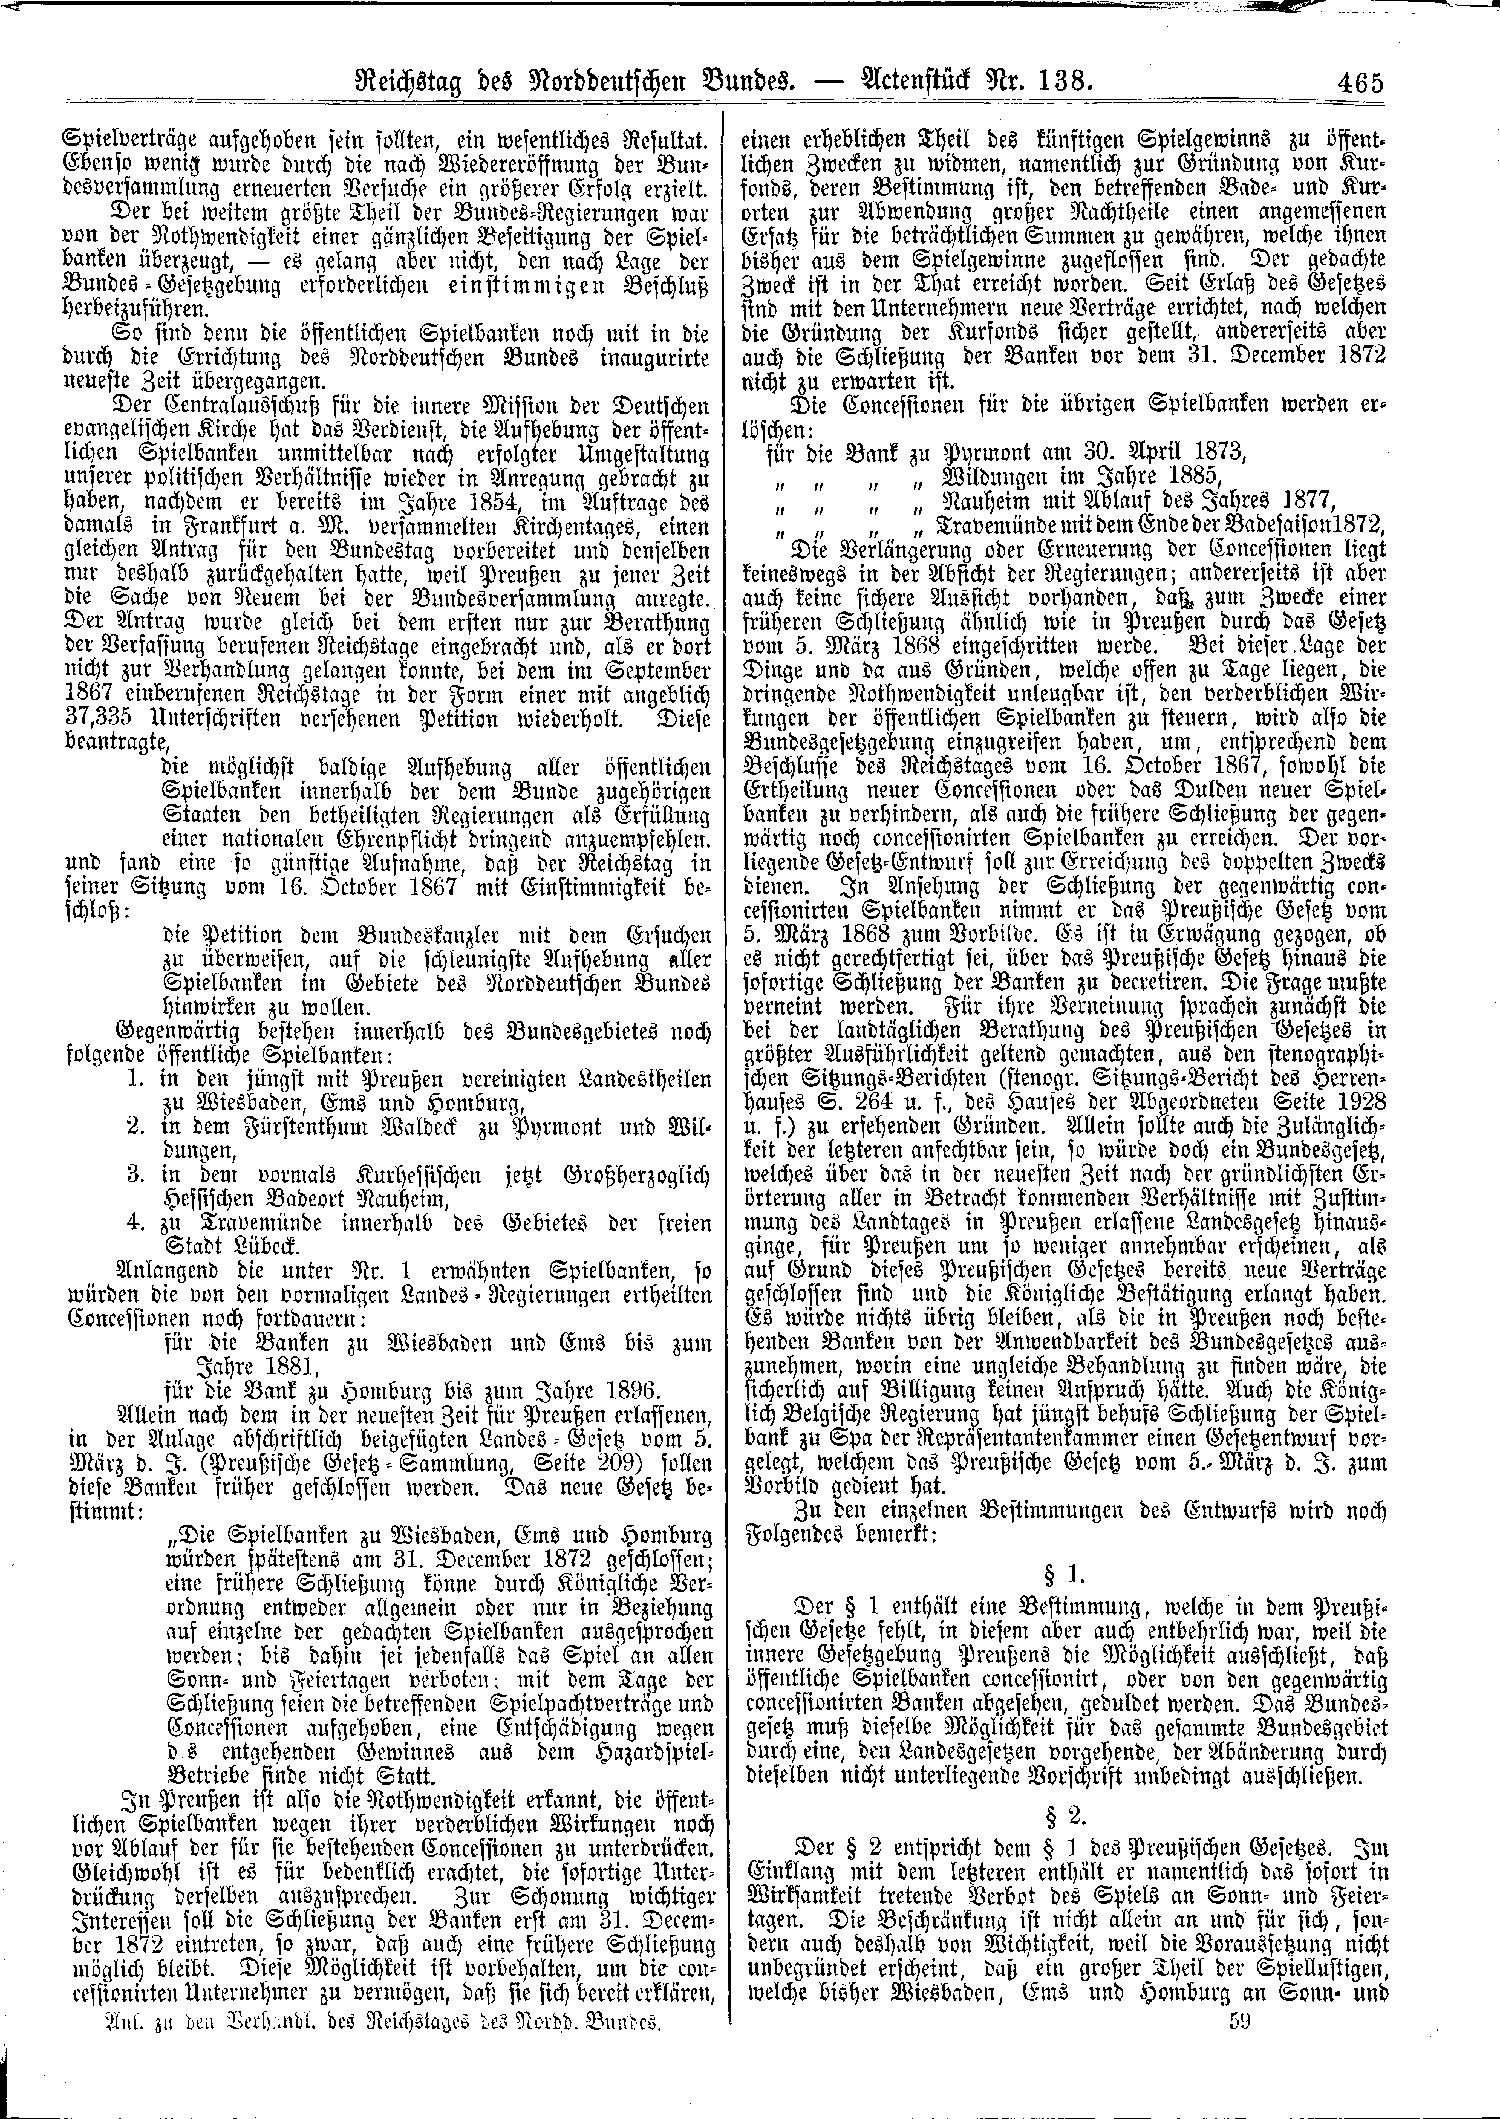 Scan of page 465